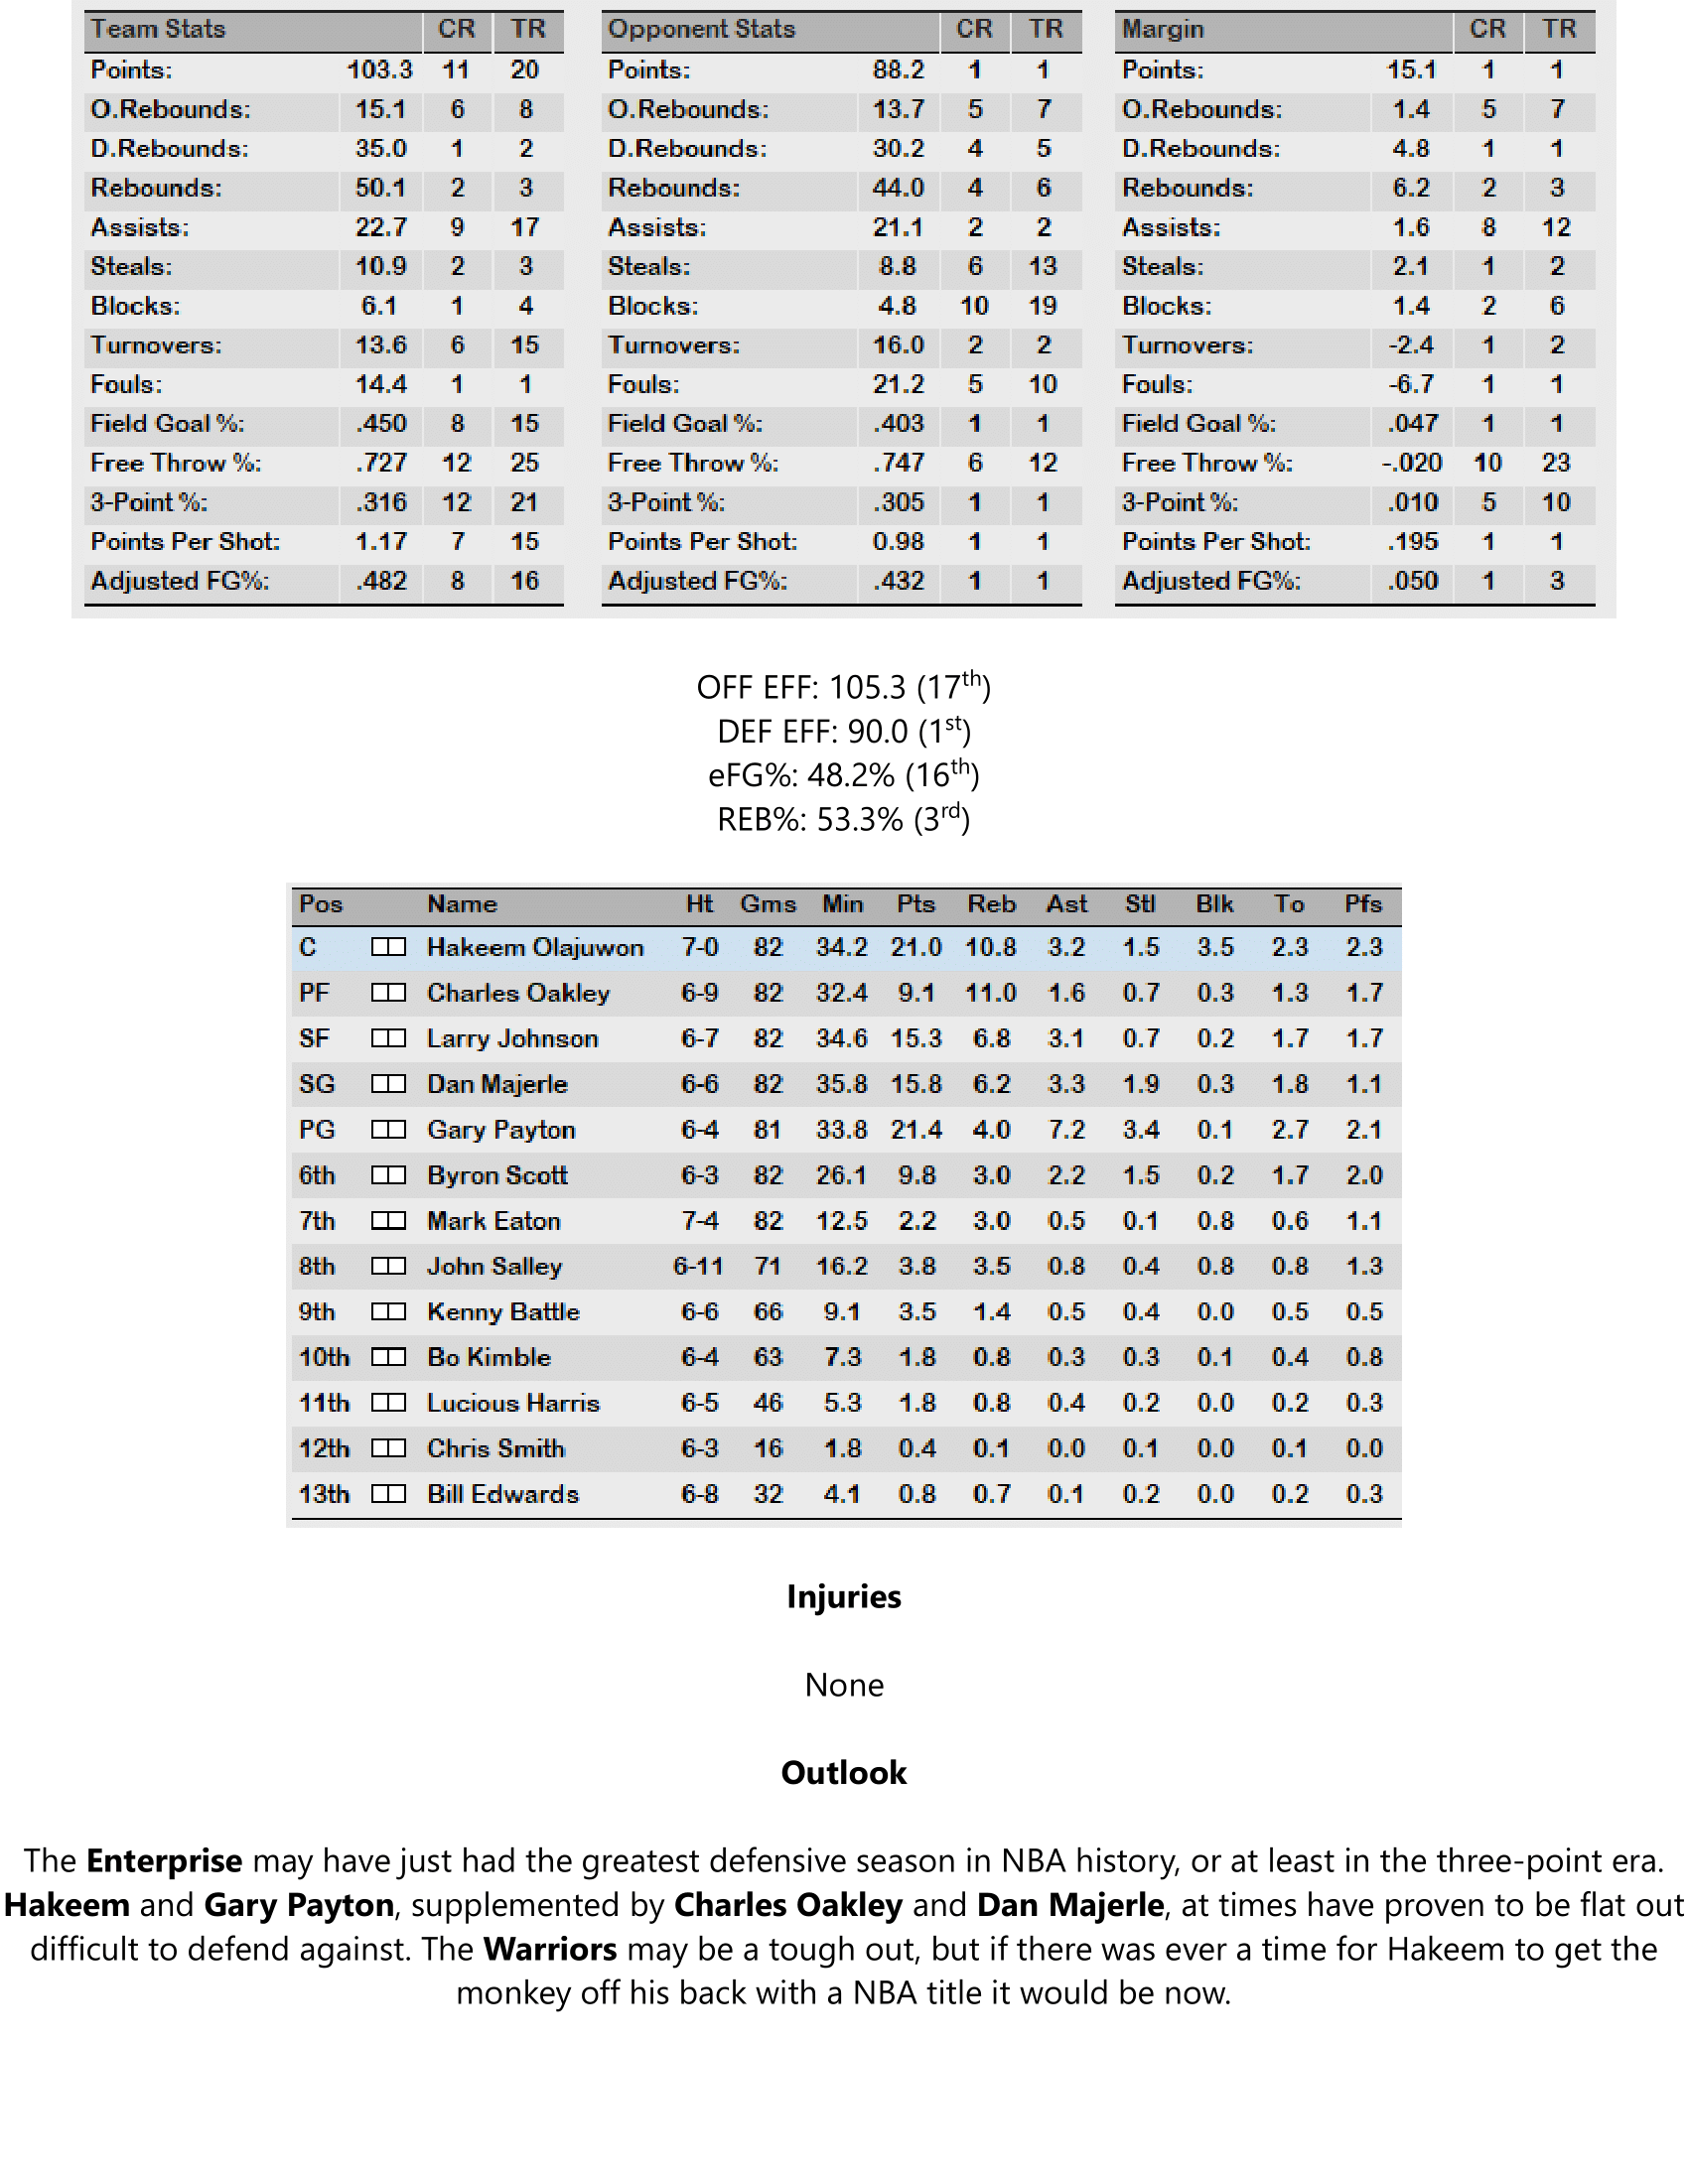 93-94-Part-4-Playoff-Preview-02.png